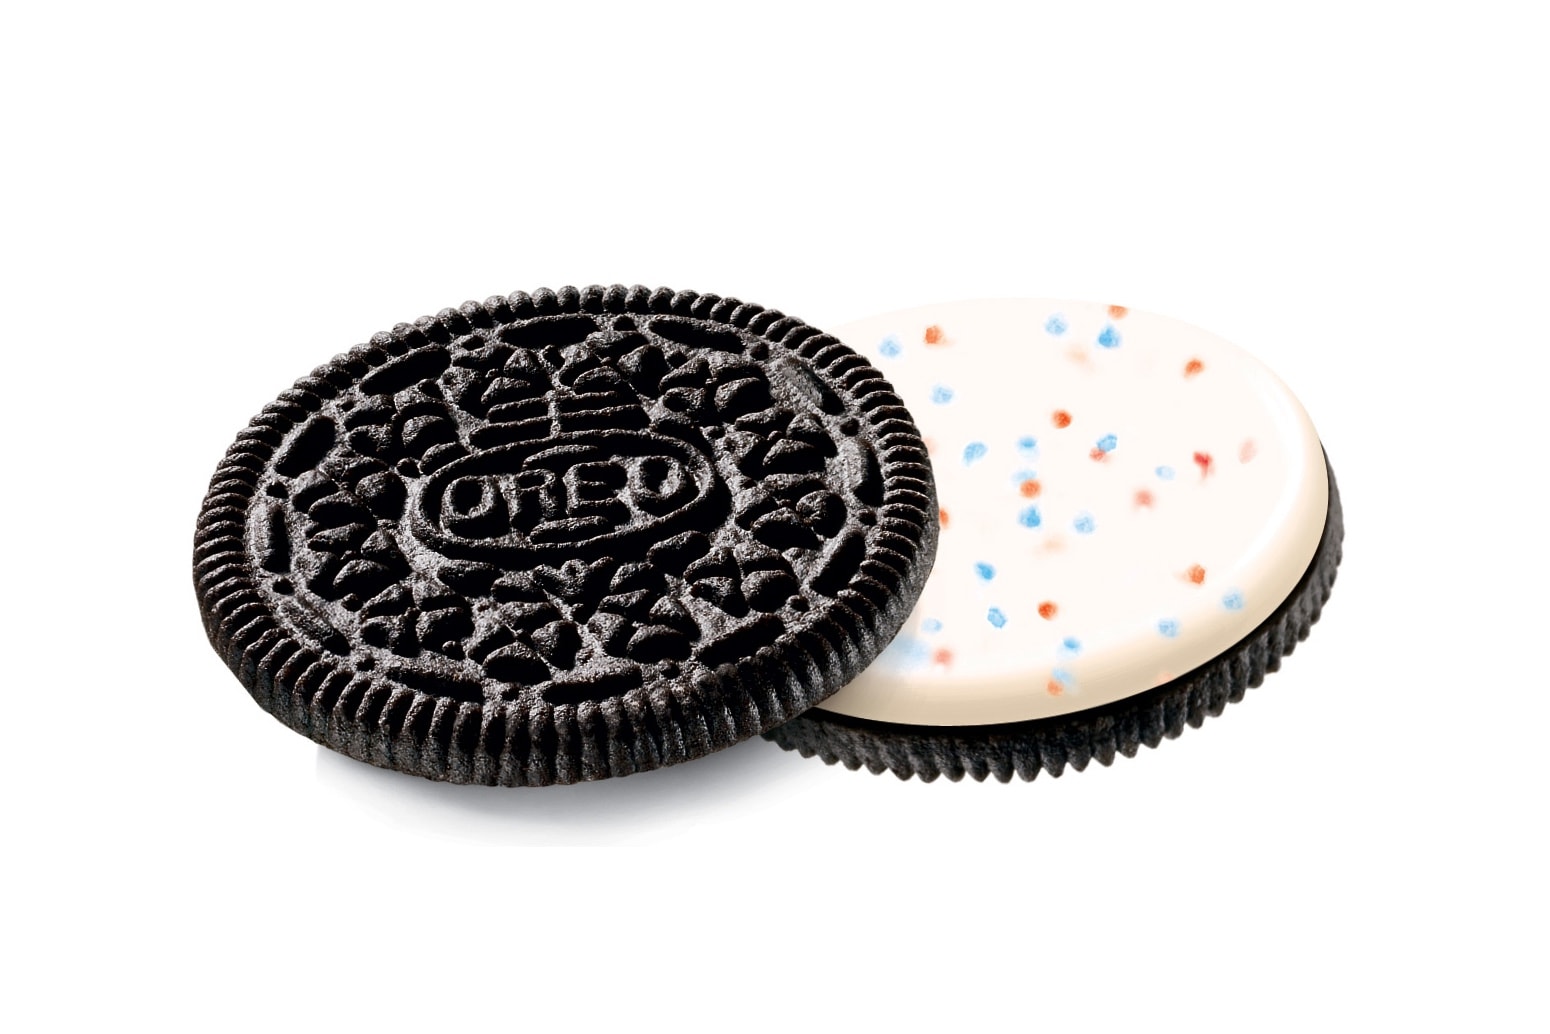 my oreo creation contest and new firework flavor 2017